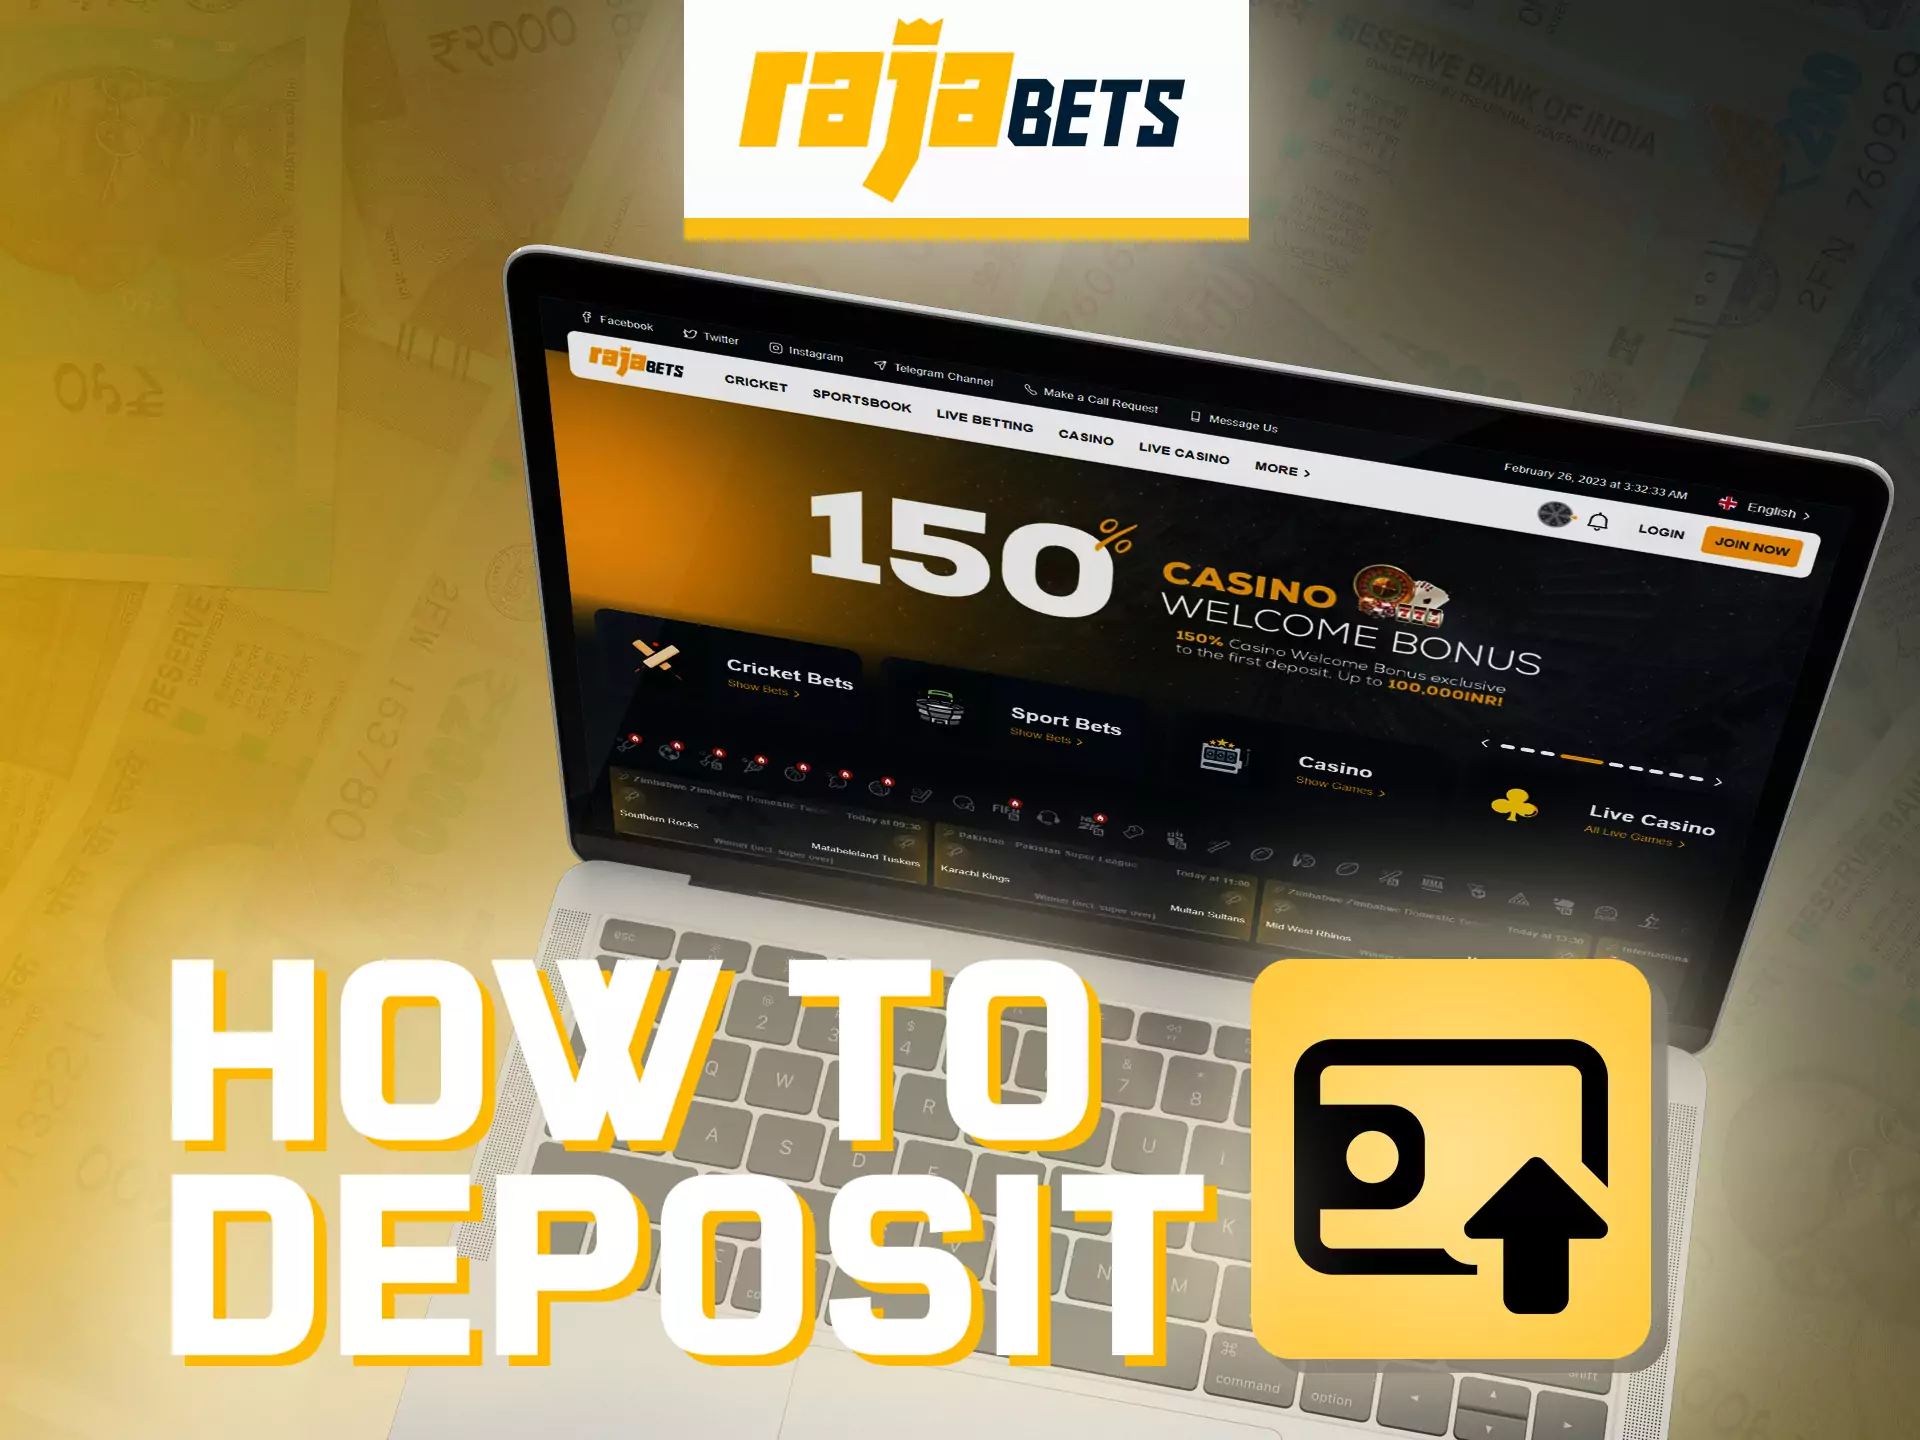 With these instructions, it's easy to fund your Rajabets account to place your bets.